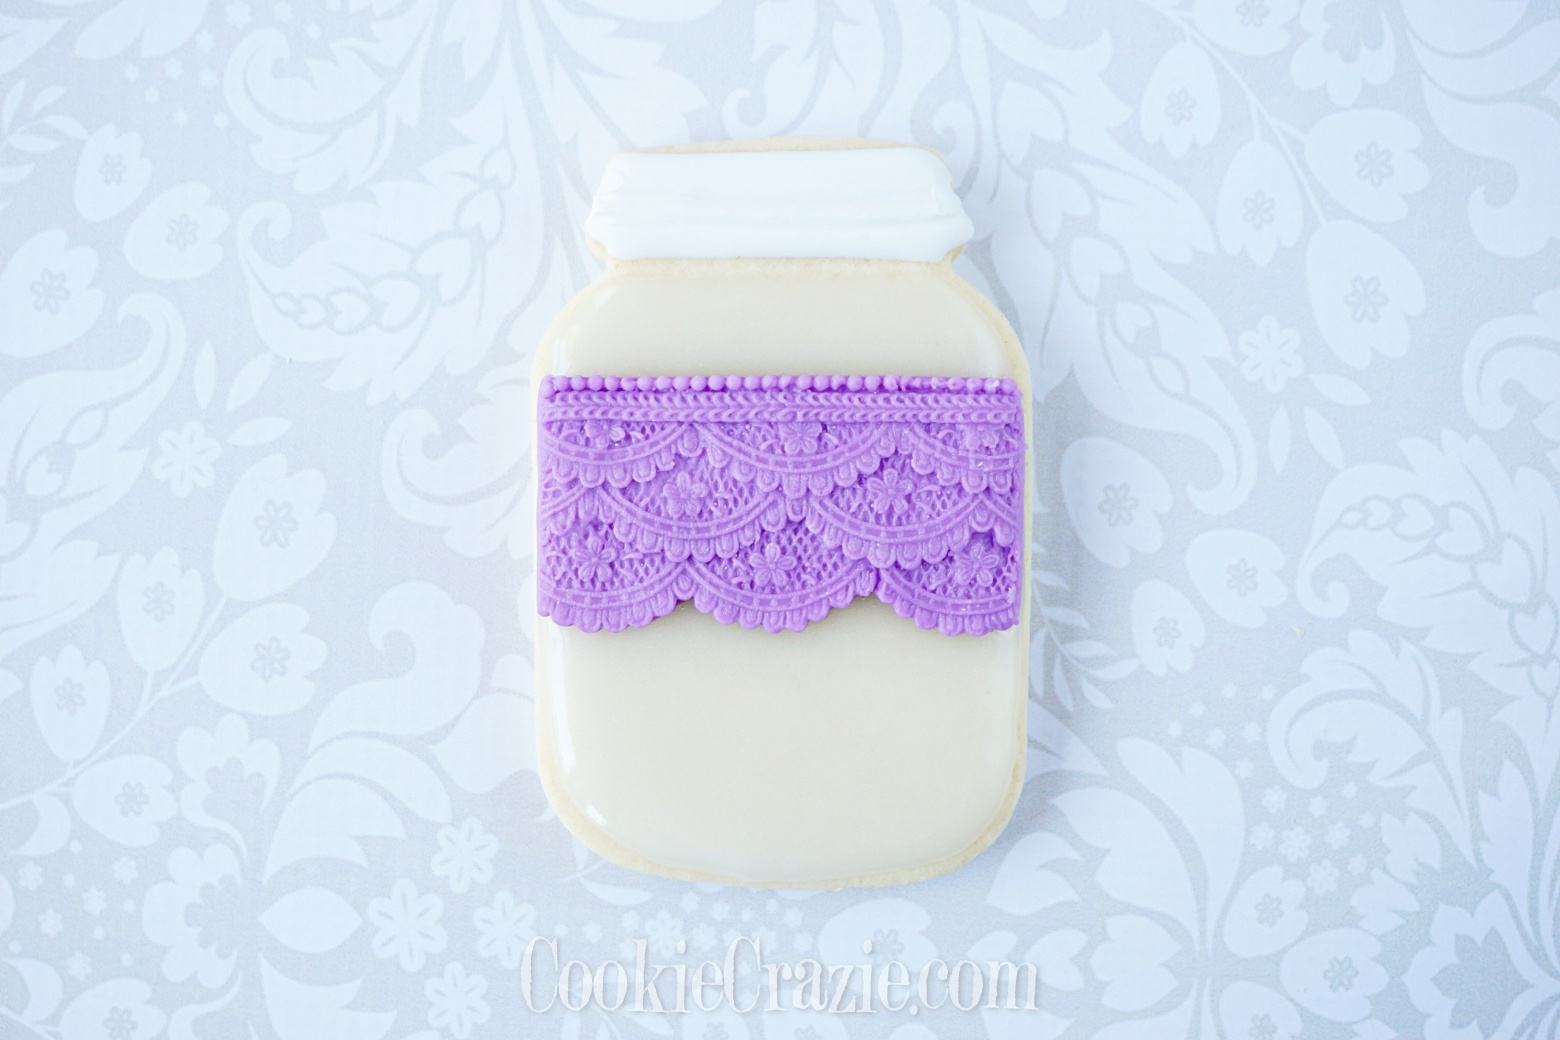  Lacy Mason Jar Decorated Sugar Cookie YouTube video  HERE  